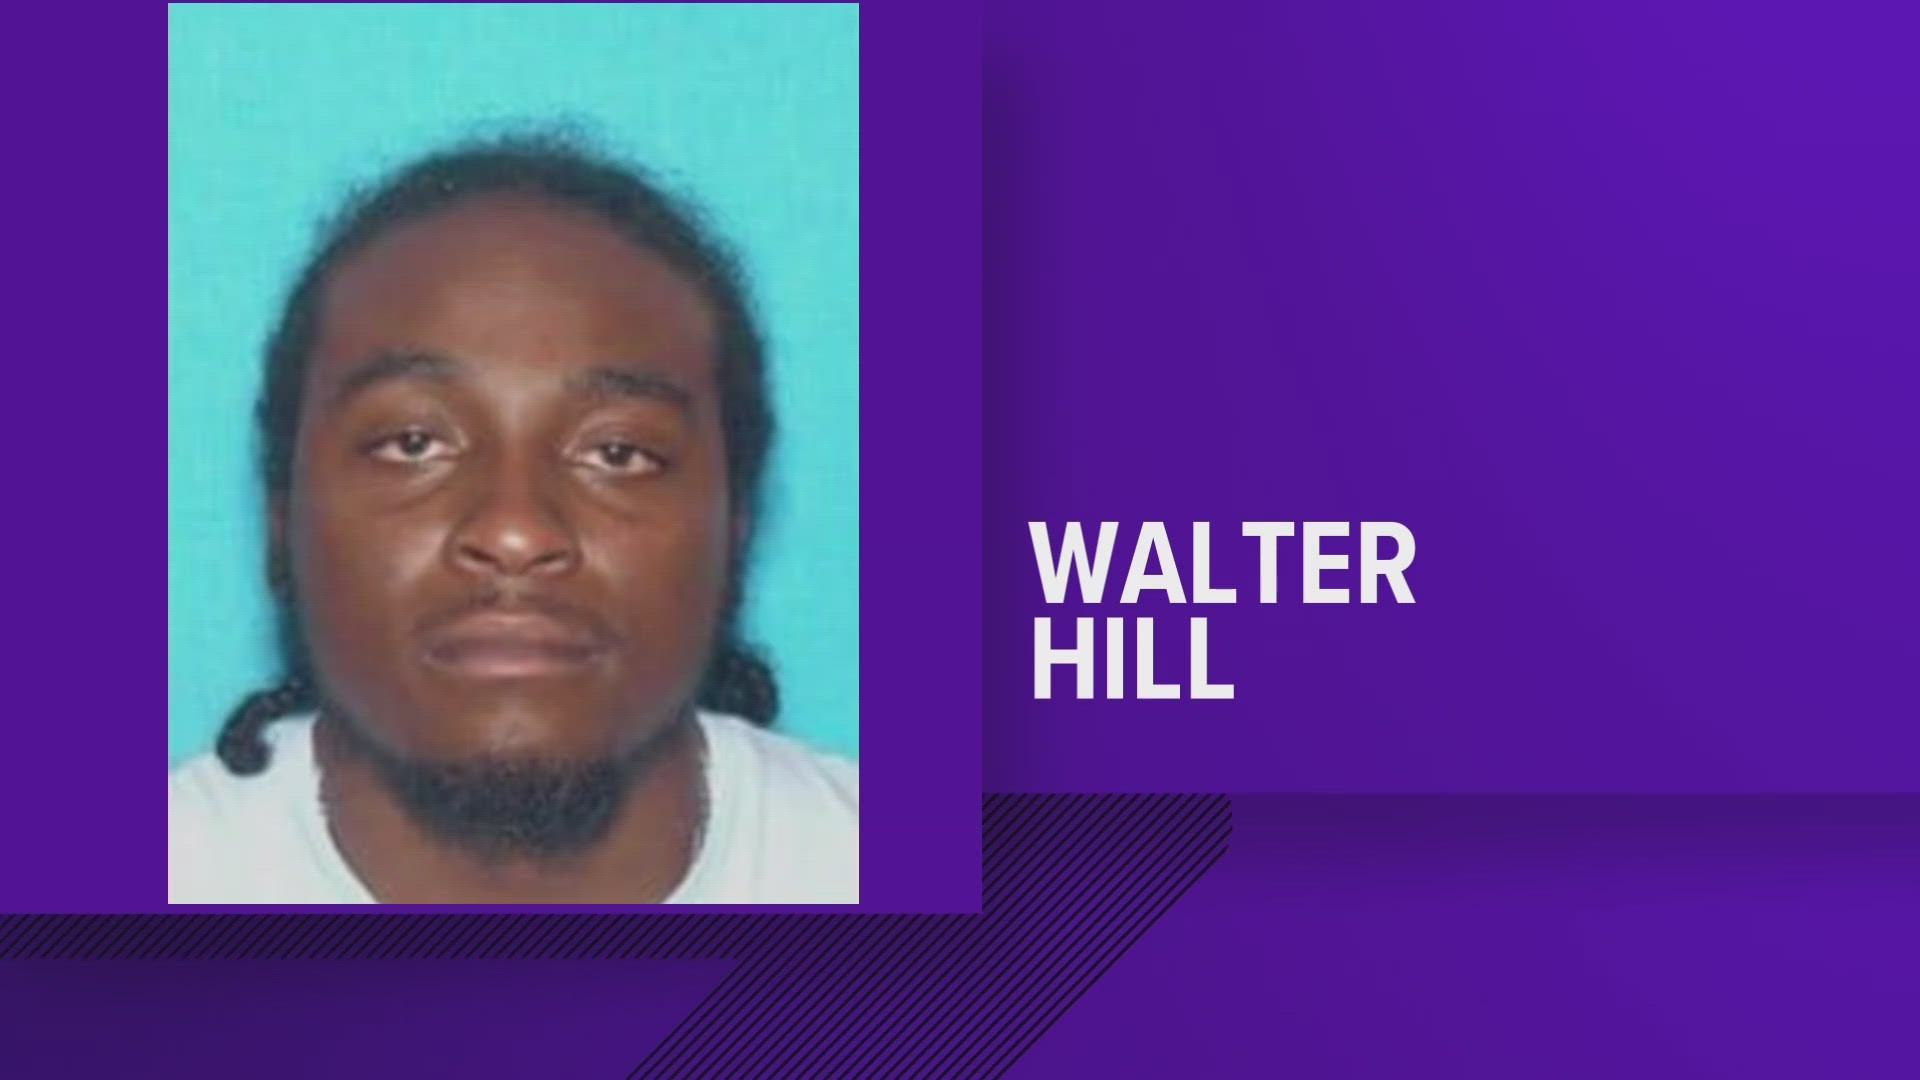 According to Knoxville Police, 27-year-old Walter Hill shot at his girlfriend and her son Saturday night before driving away.